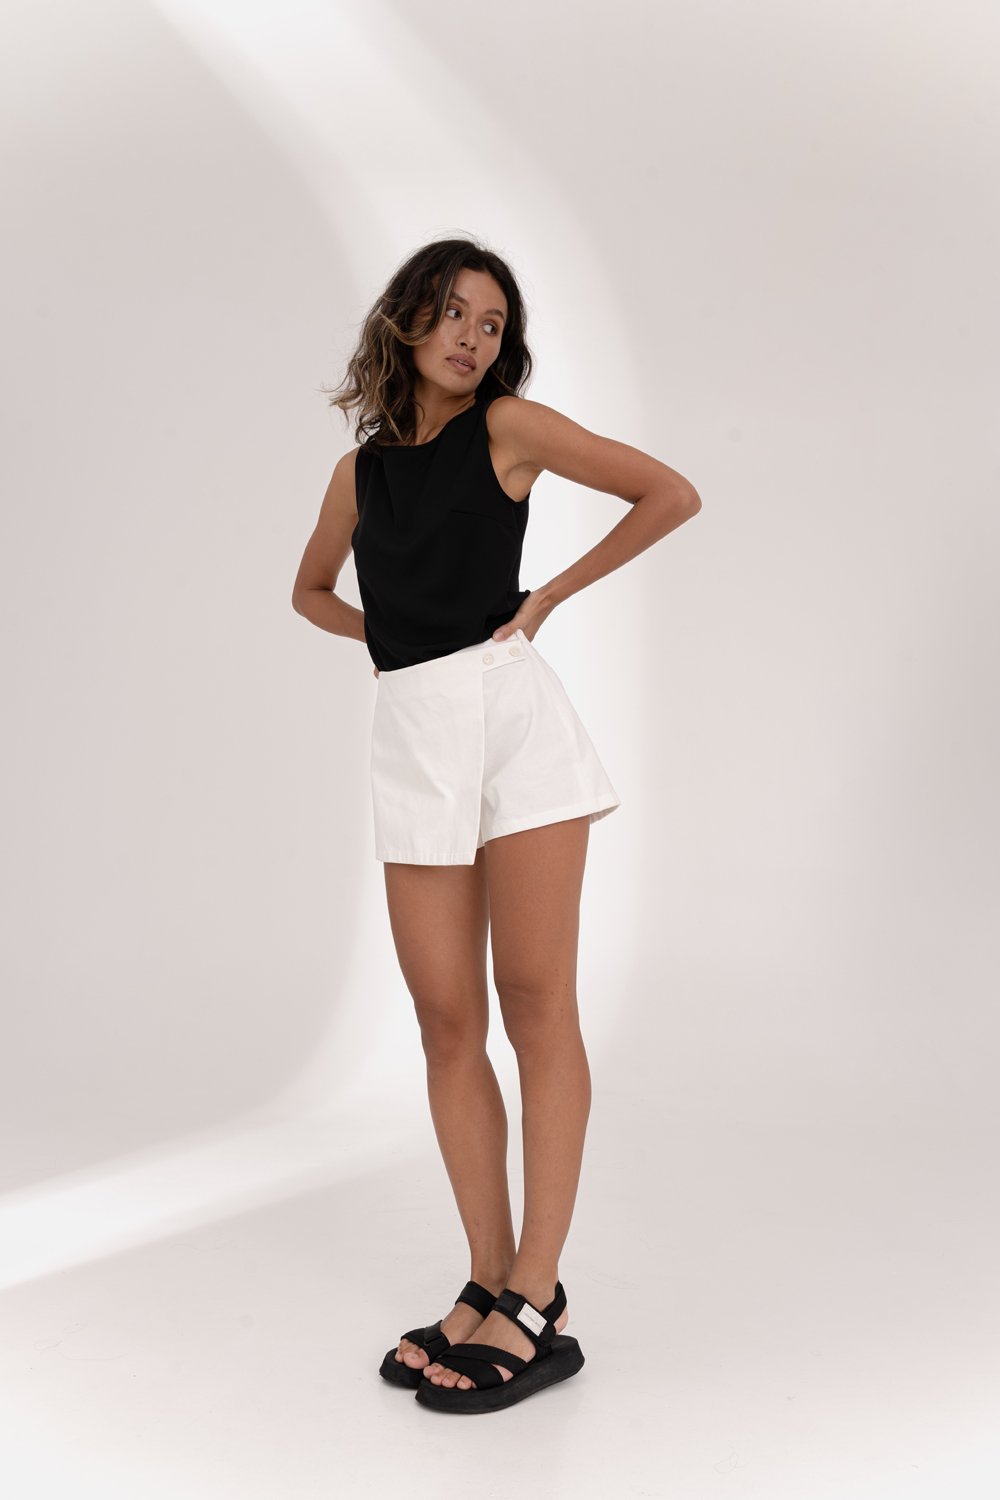 Cotton shorts-skirt in milky color.